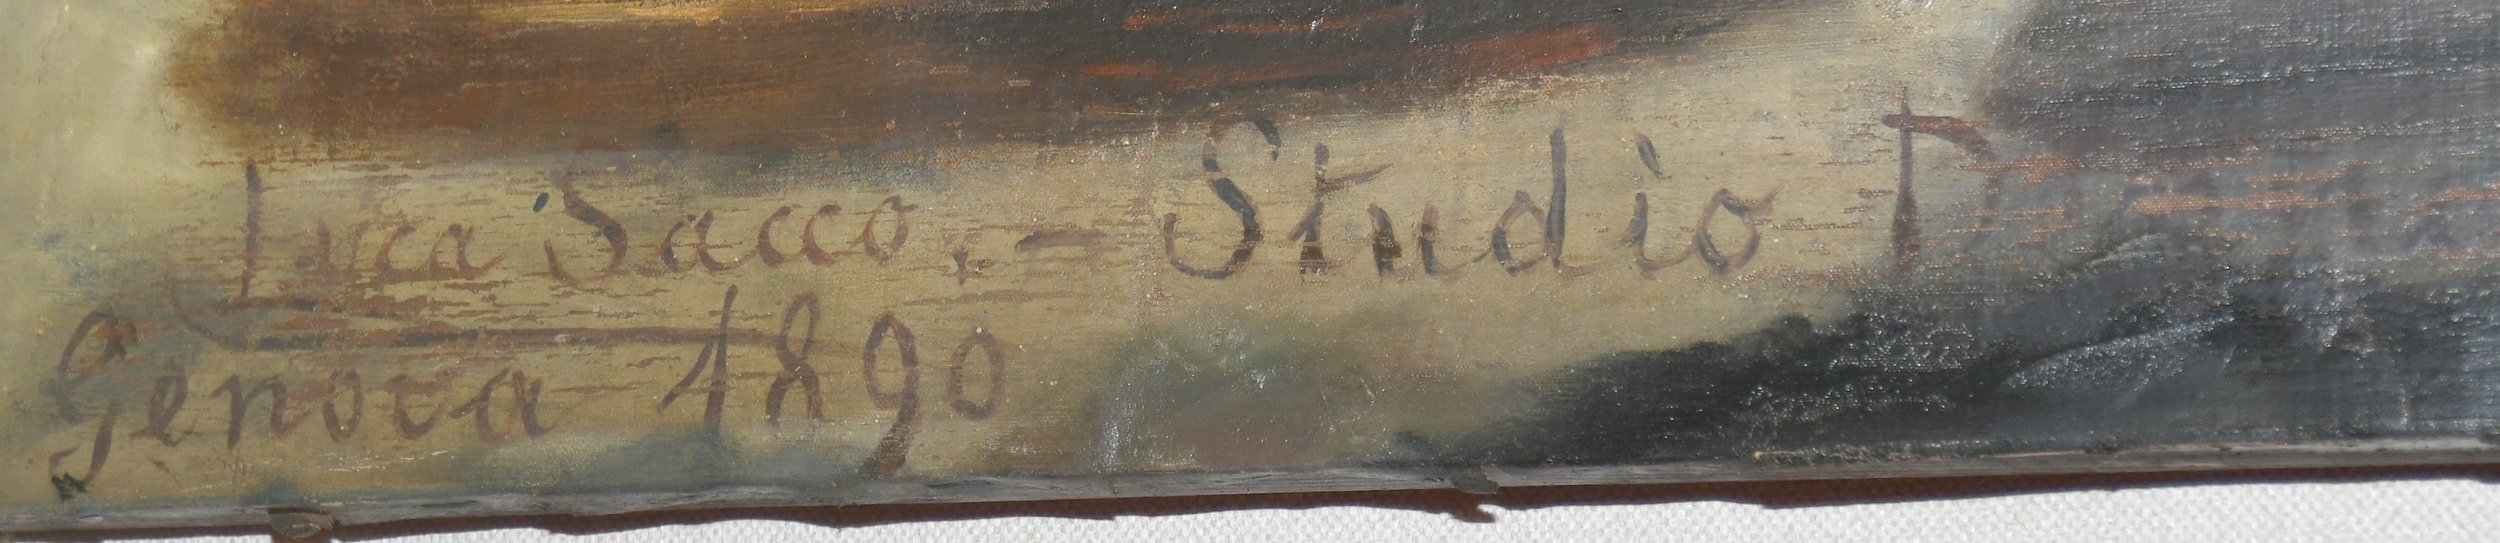 The signature by the artist showed where and when it was painted.